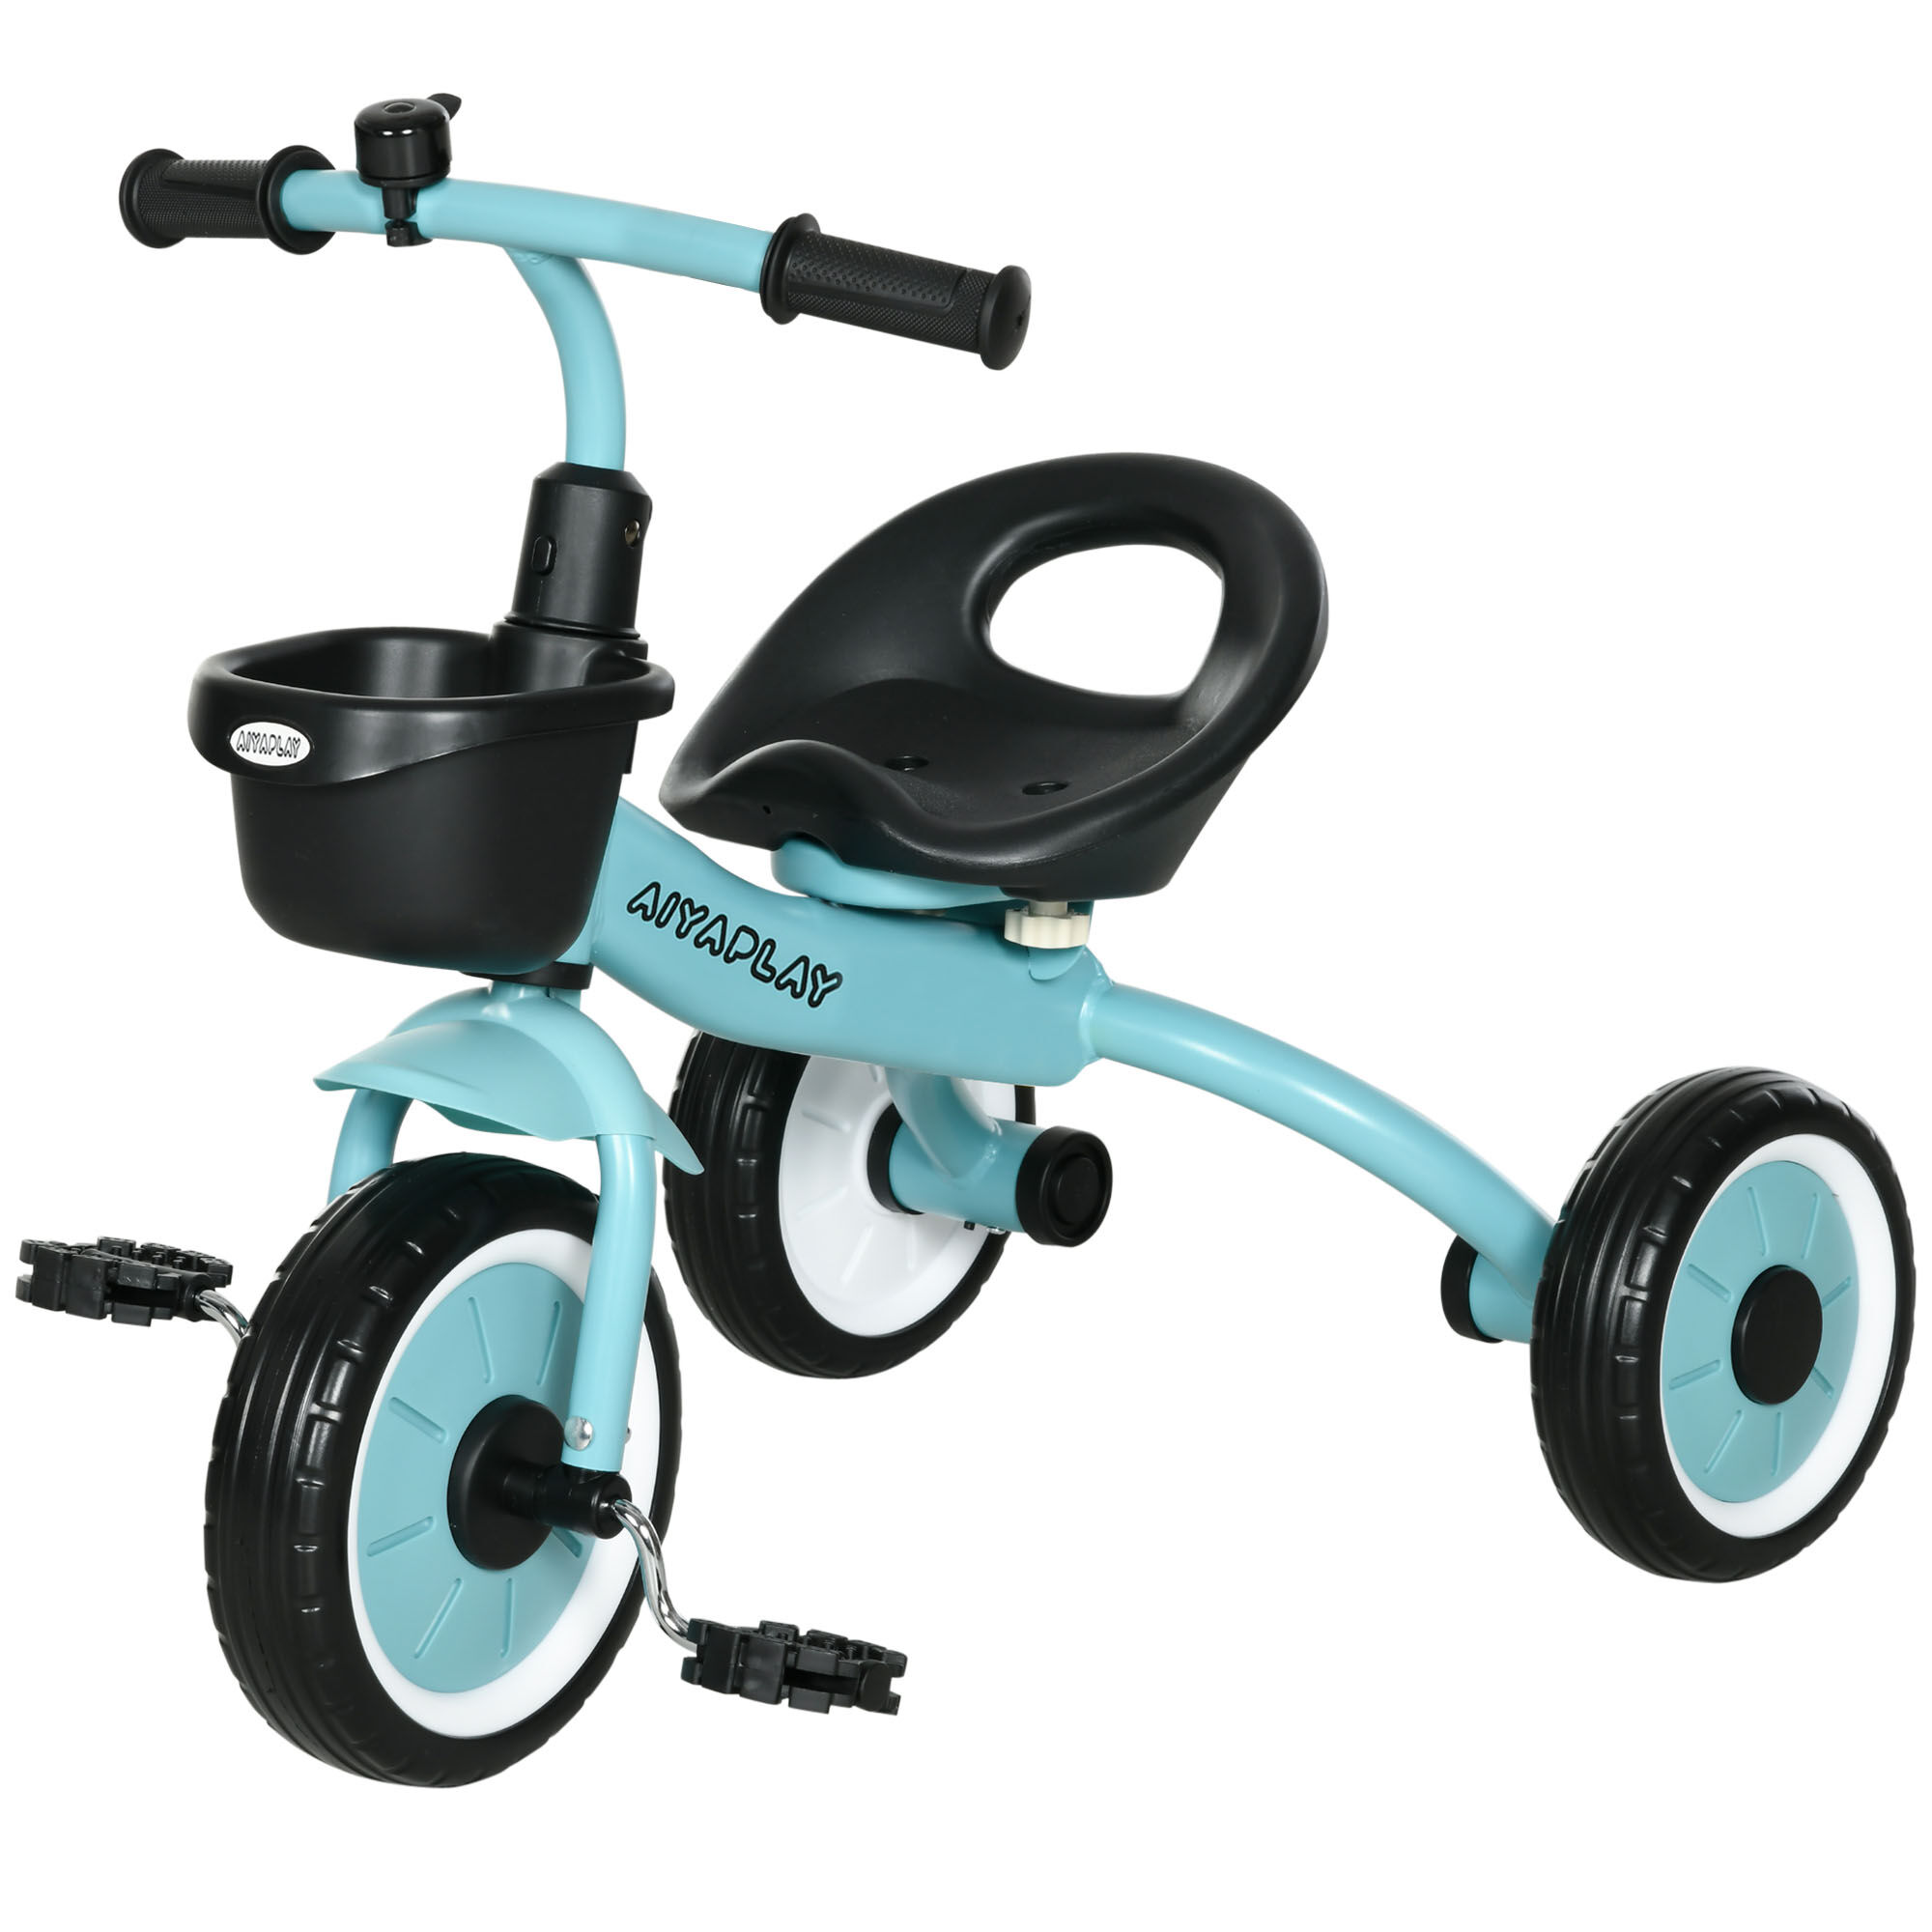 Qaba Tricycle for Kids Age 2-5, Toddler Bike for Children, Blue